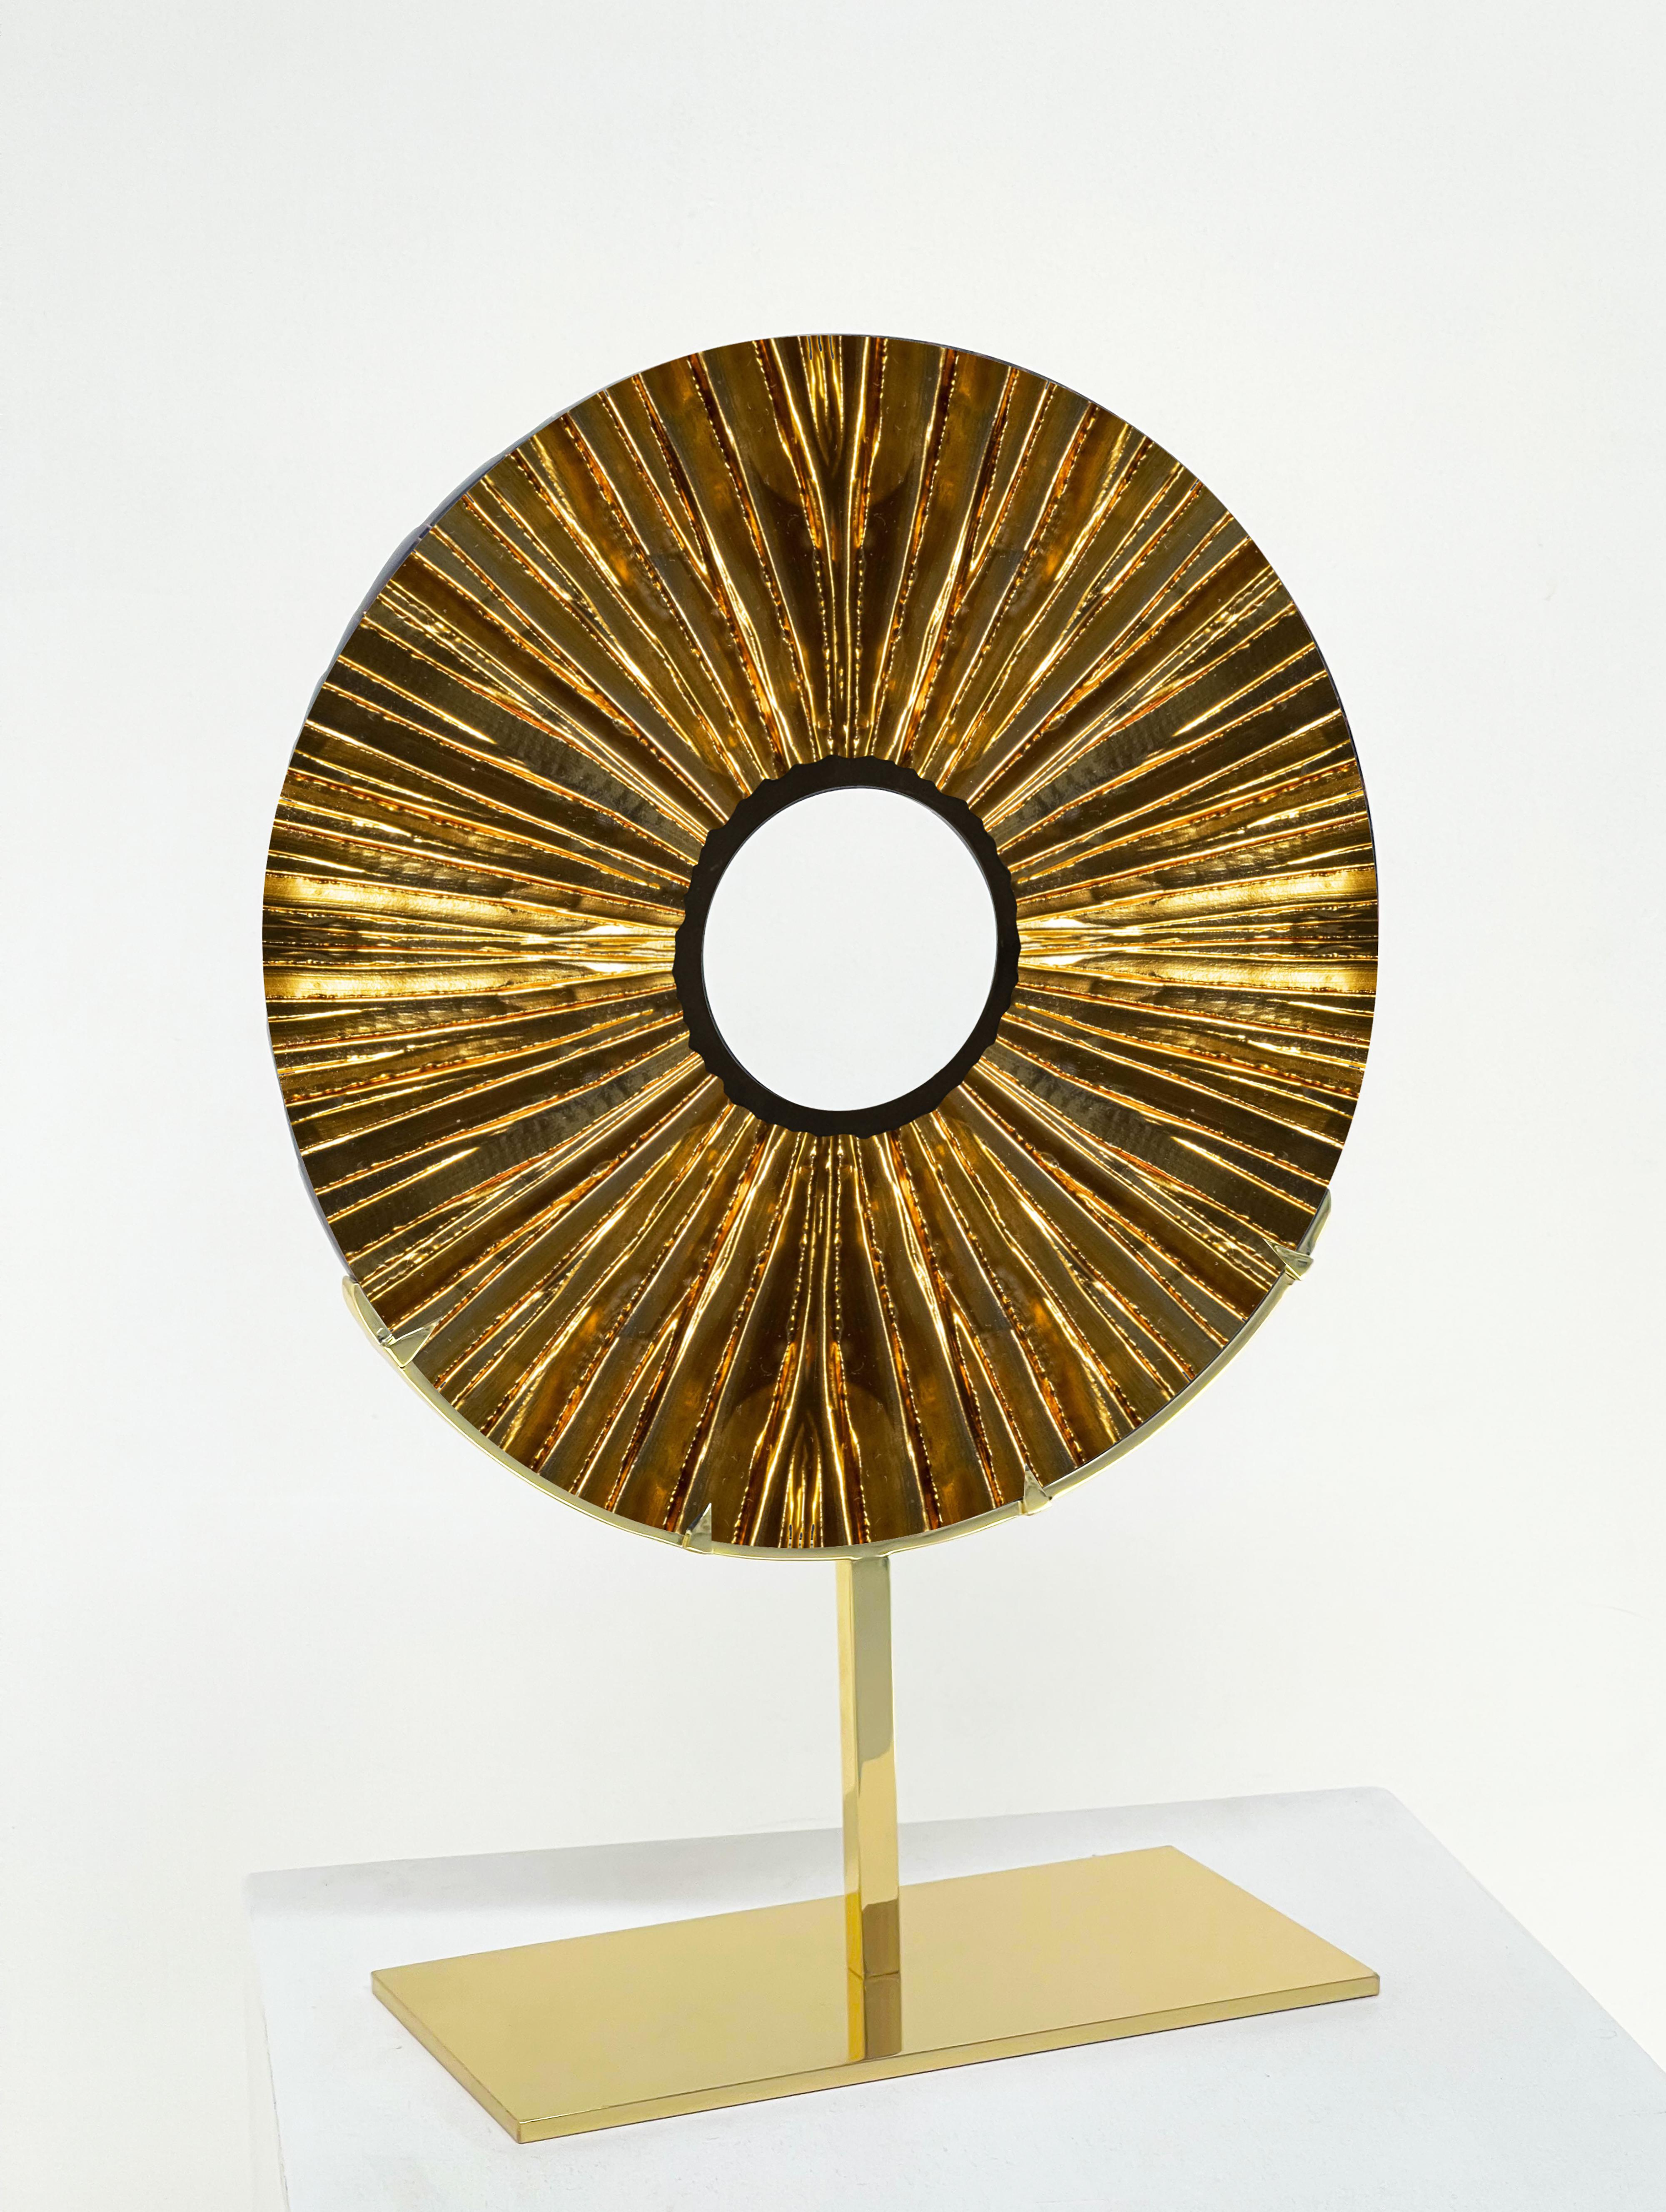 2021 Colletion of decorative objects by Ghirò Studio (Italy,Milan).
The 'Eye' is not only a luxury refined piece of furniture but it is also a hand carved sculpture designed to embellish with uniqueness, beauty and charming any living area or